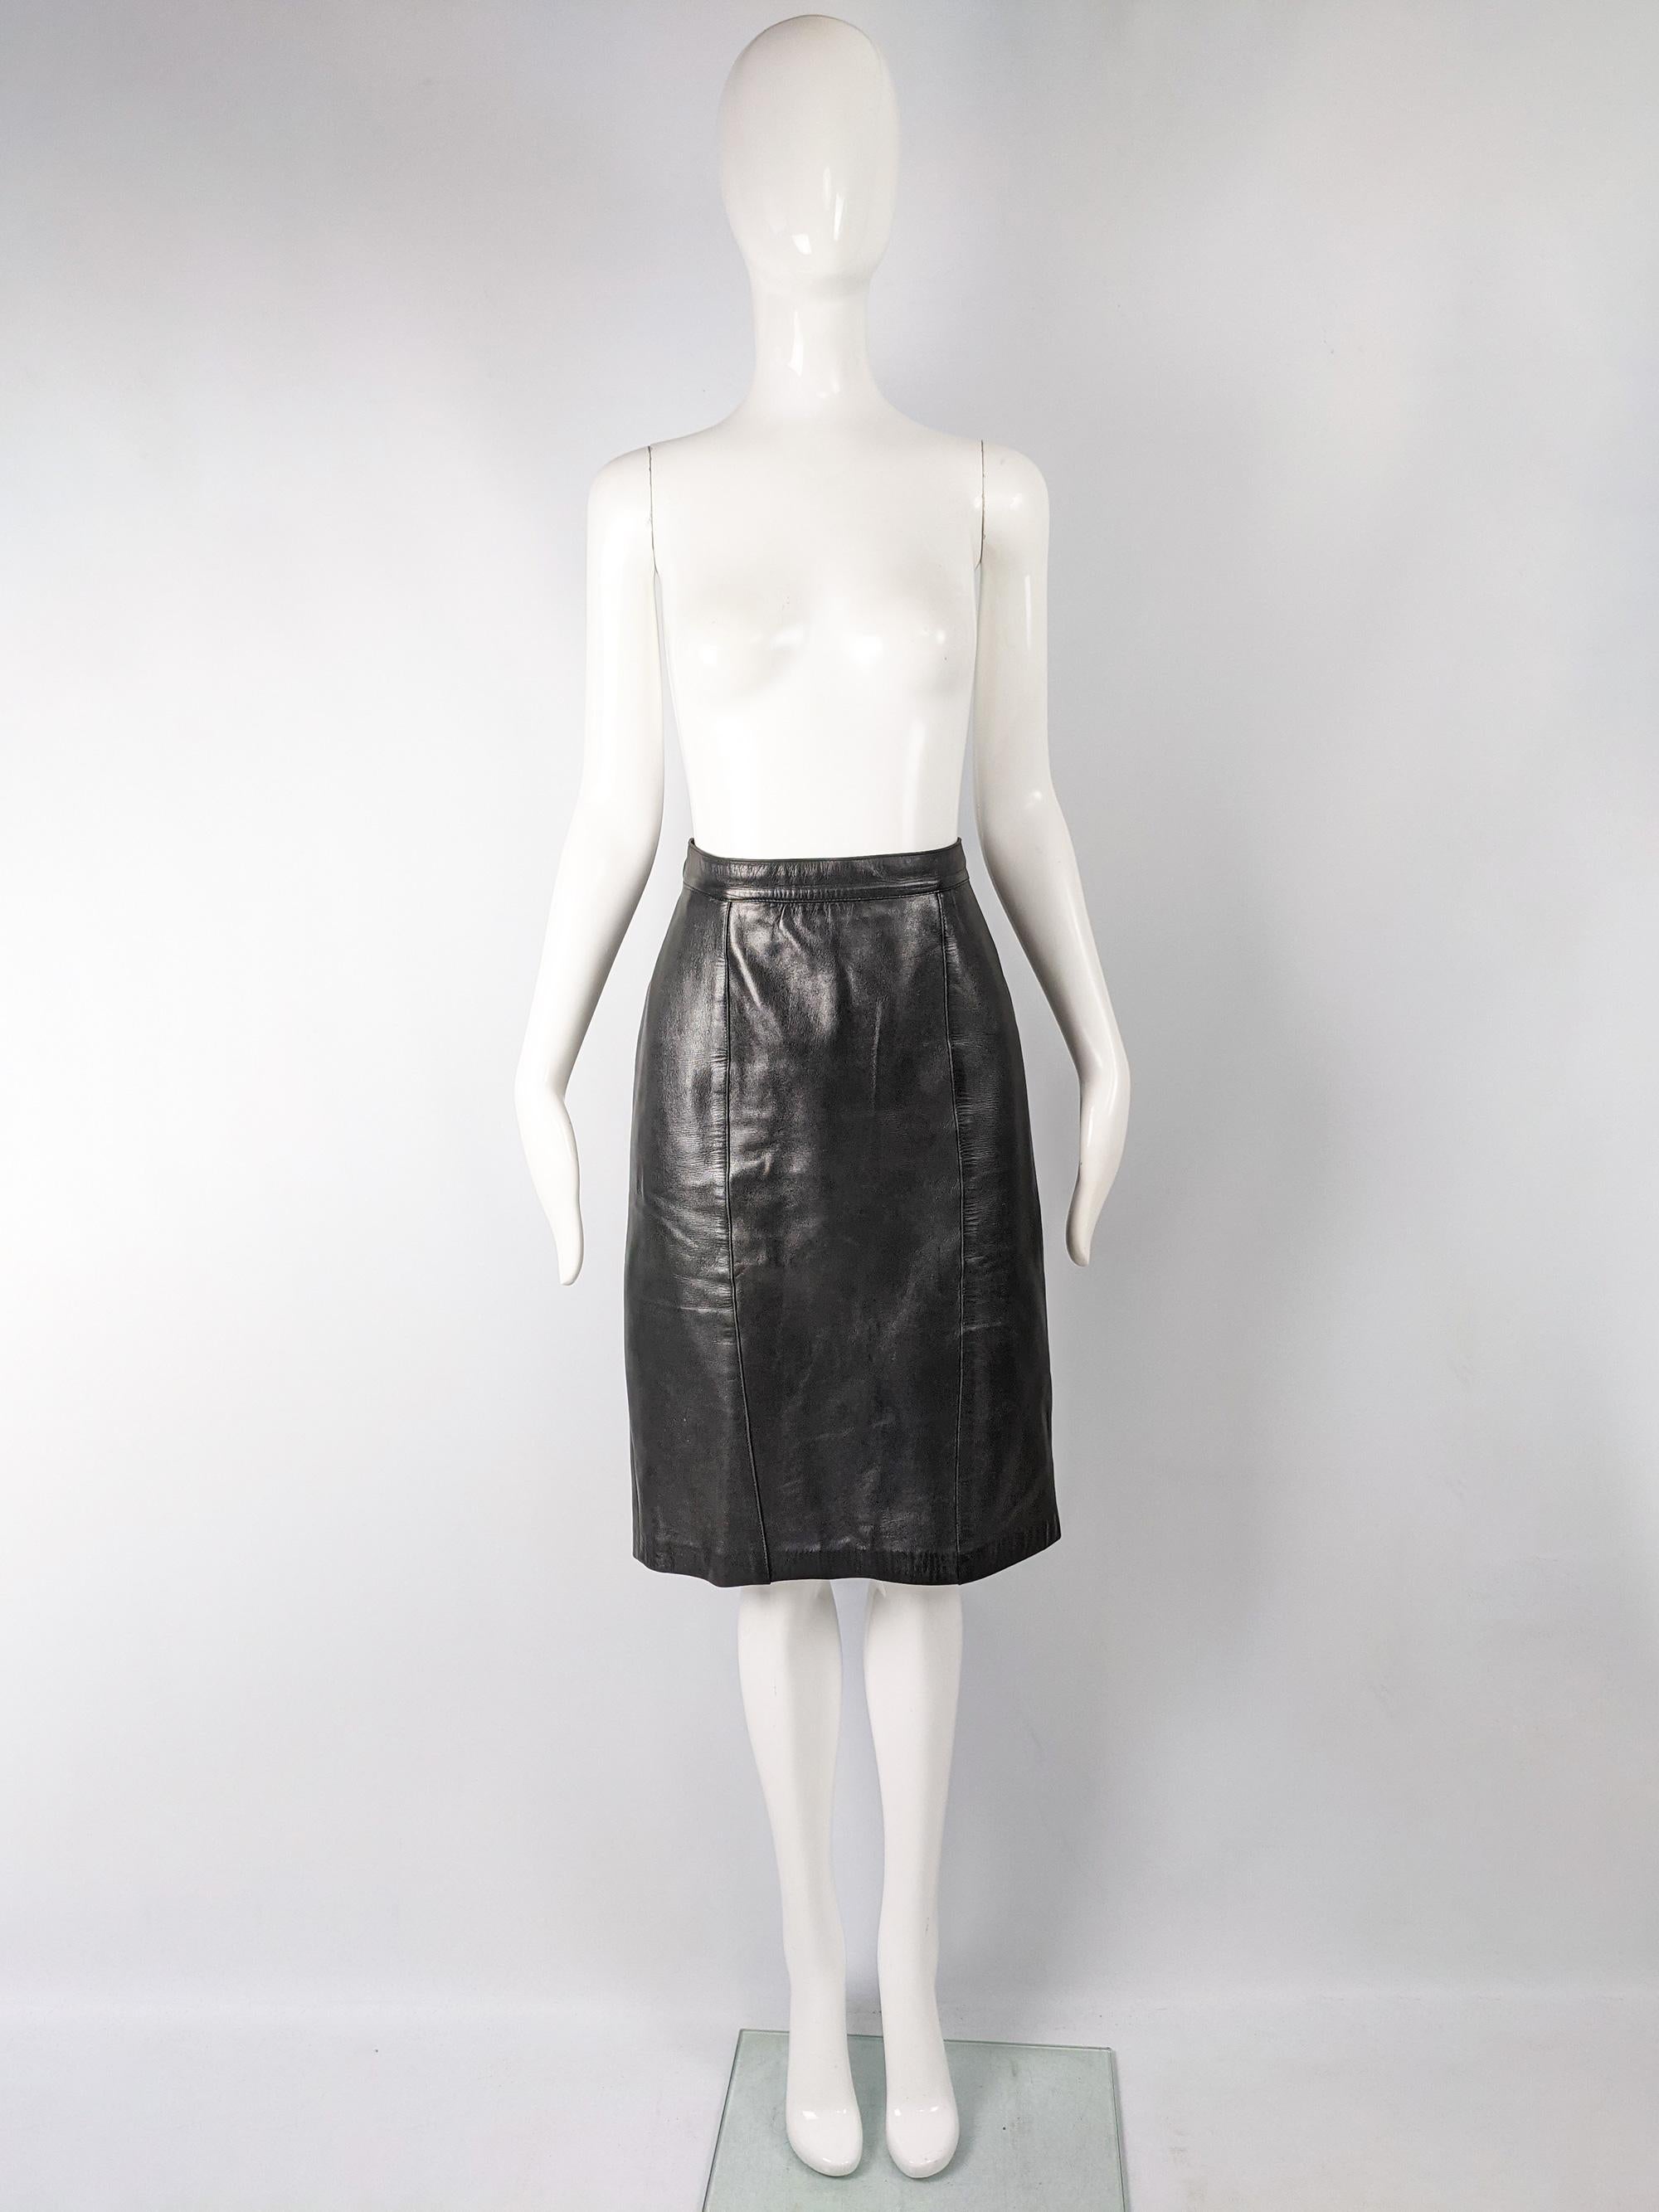 A chic vintage women's skirt from the 80s by a luxury Spanish fashion house, Loewe. In a Buttery soft black leather with a timeless, pencil shape and a button fastening at the back that is engraved with Loewe's logo. 

Size: Marked vintage 44 but